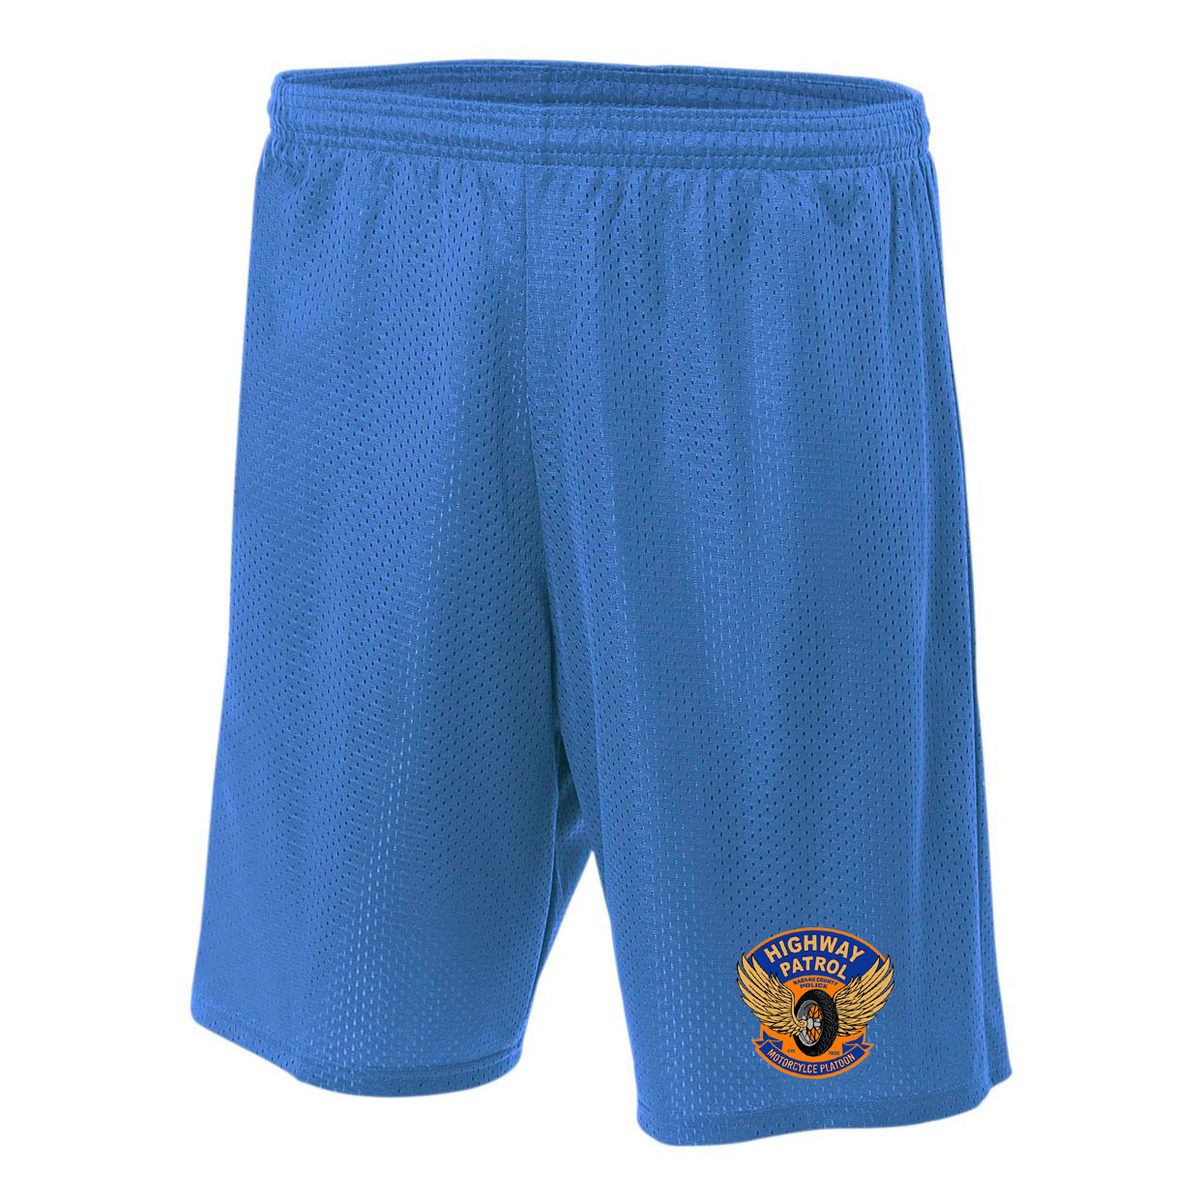 NCPD Motorcycle Unit 7" Lined Tricot Mesh Shorts